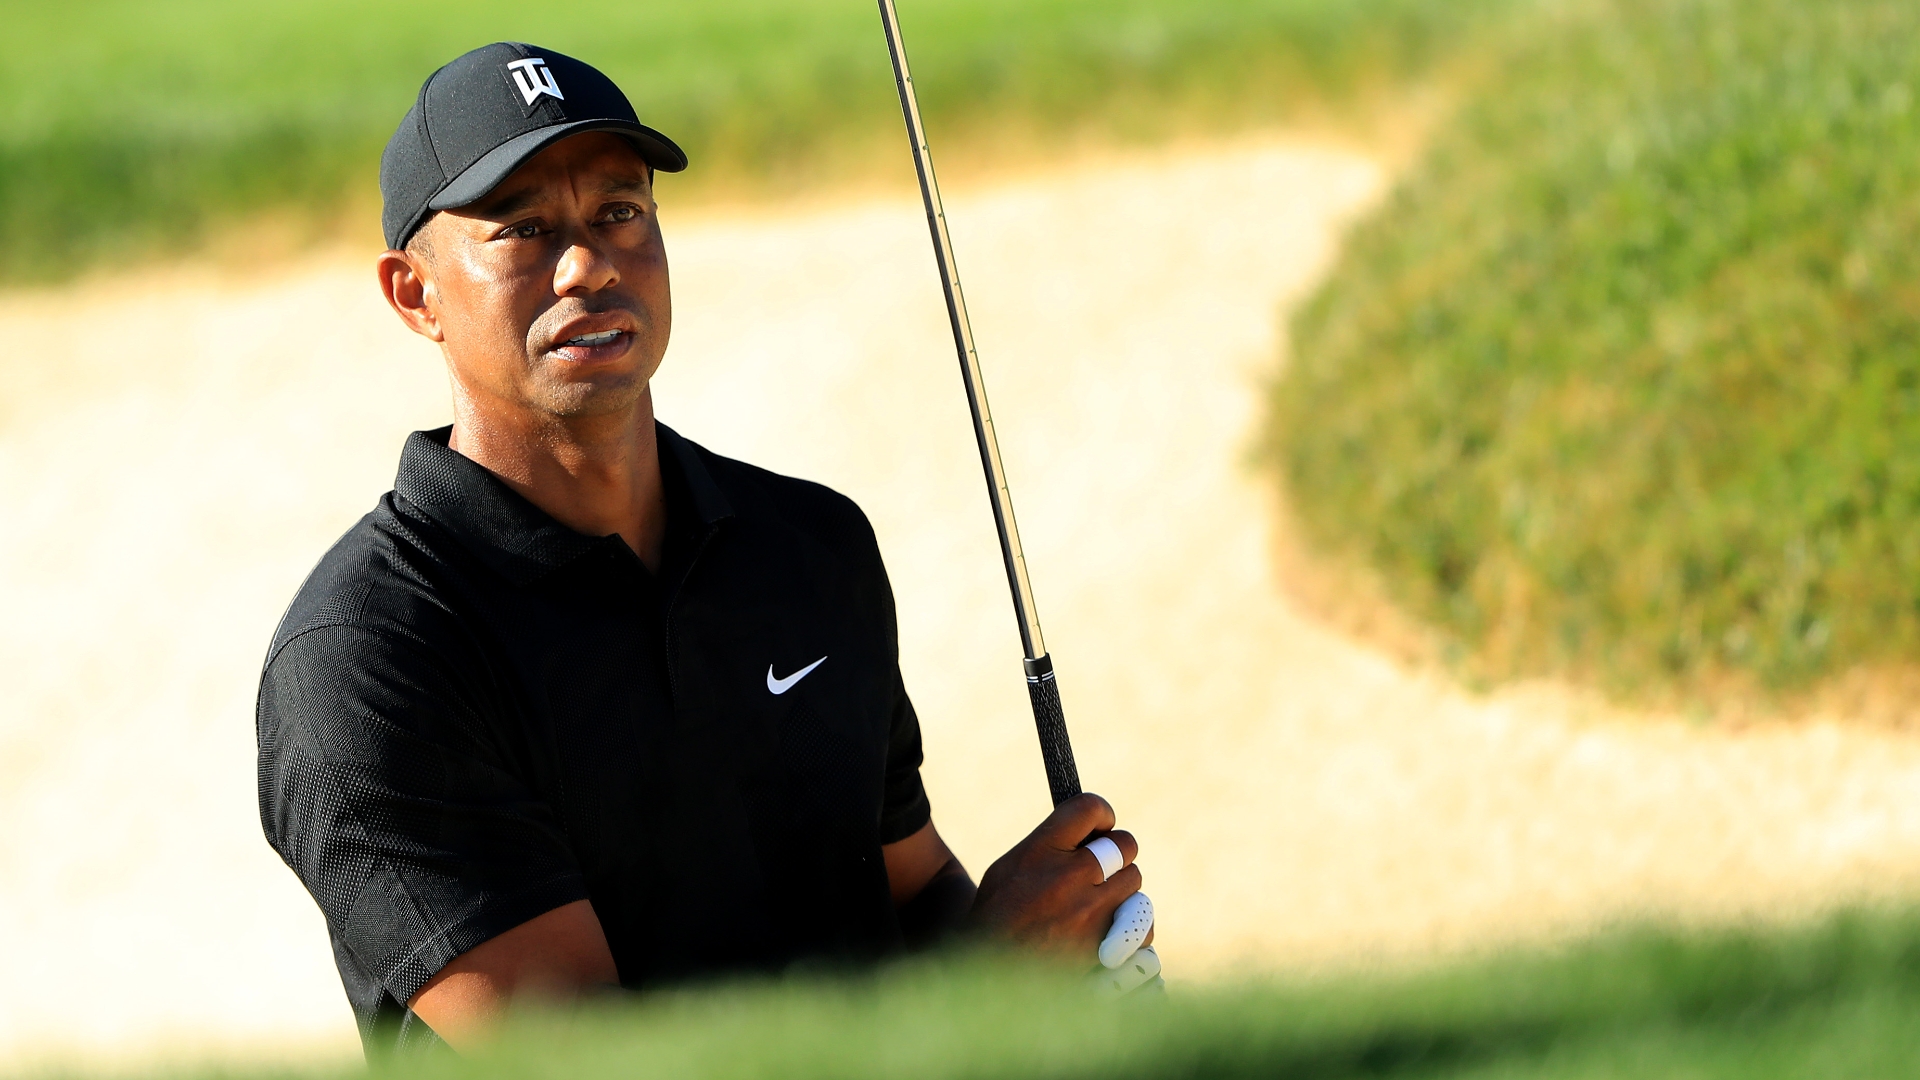 Tiger Woods looked sharp and comfortable during practice